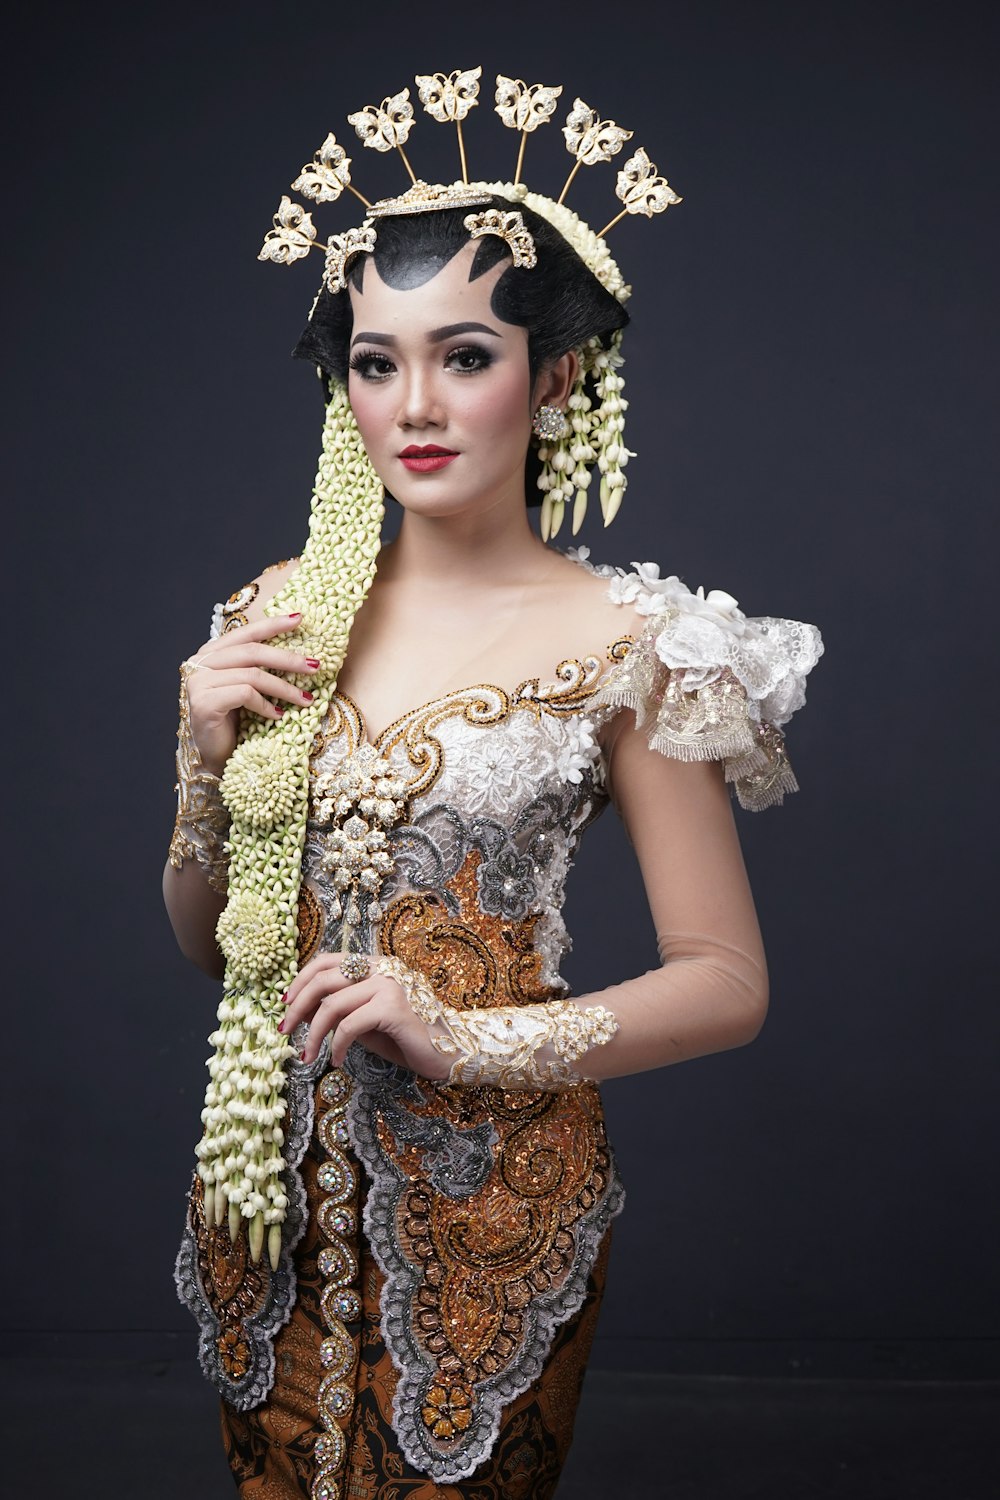 woman in white floral lace dress wearing yellow and white floral crown